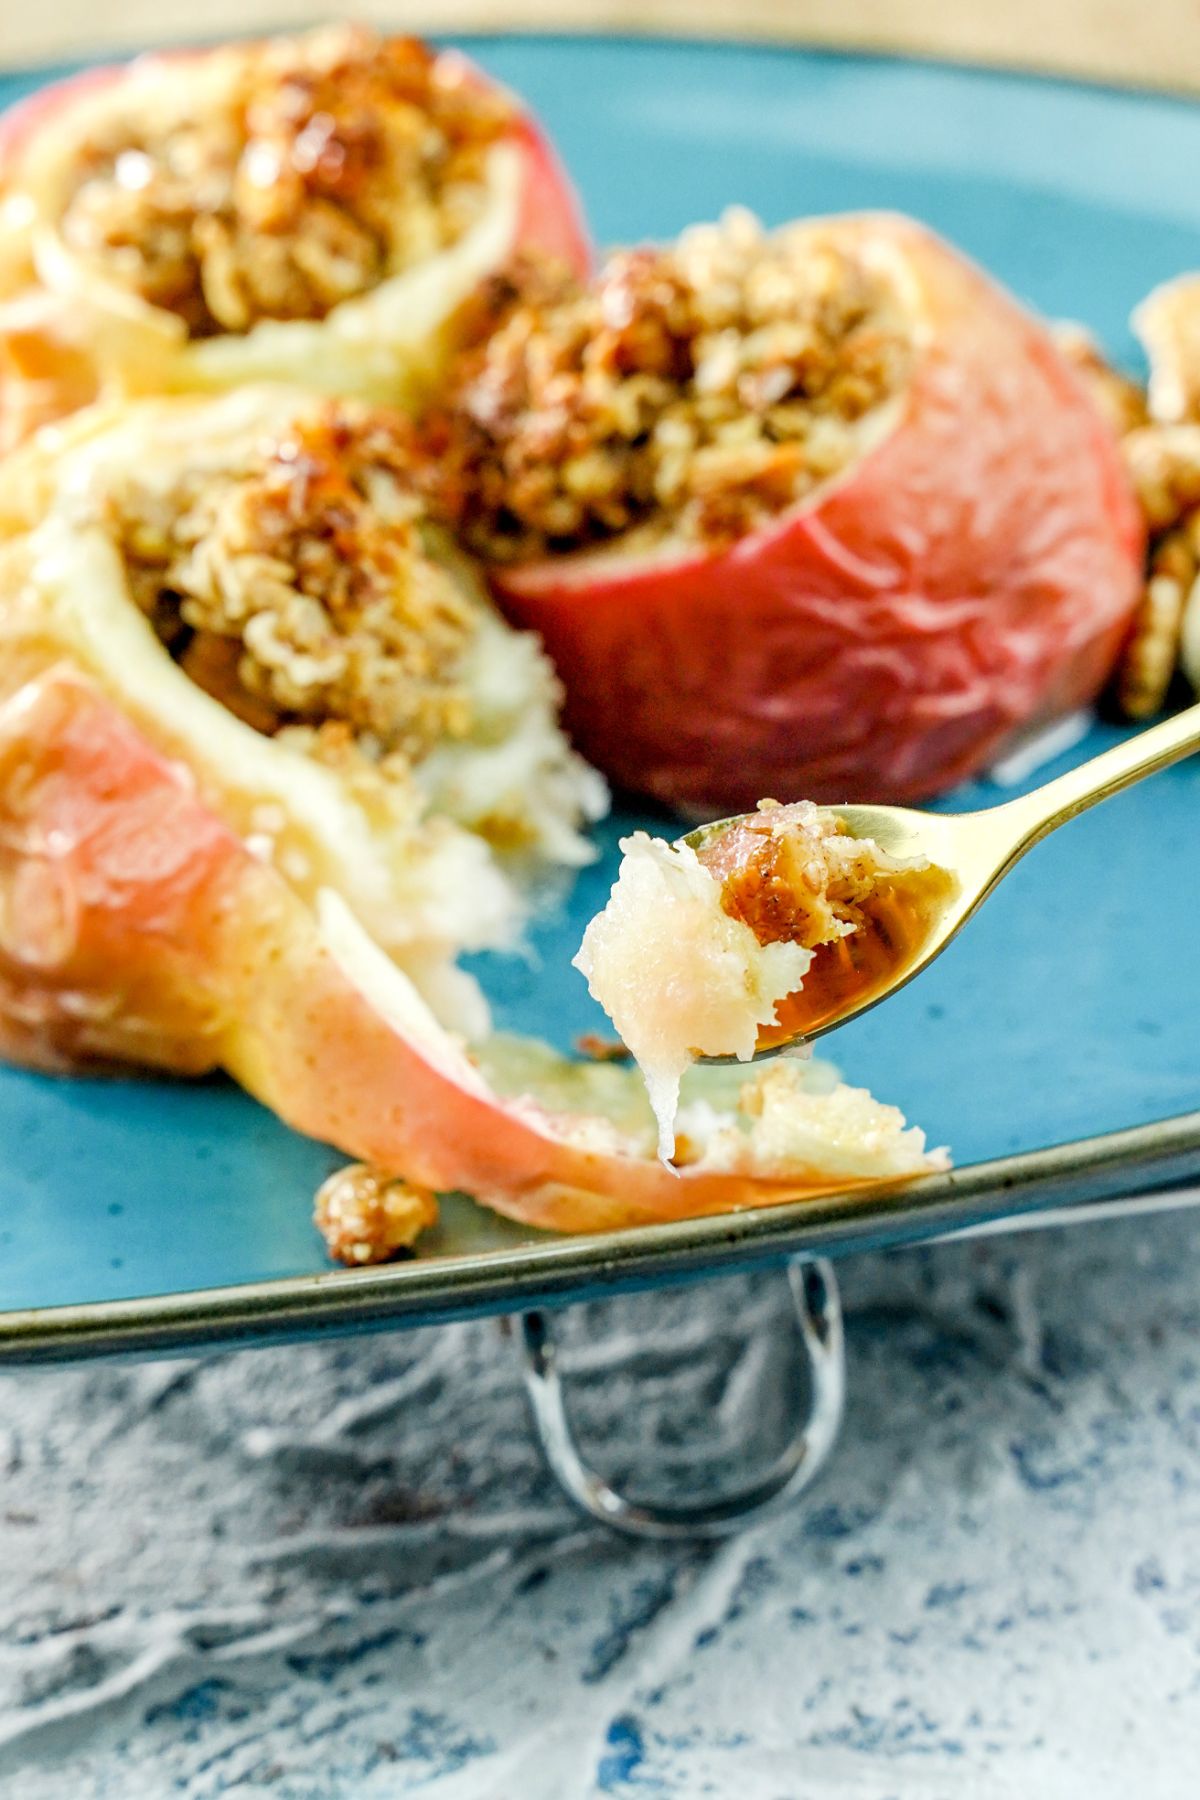 spoon of apple with oats over blue plate of stuffed apples